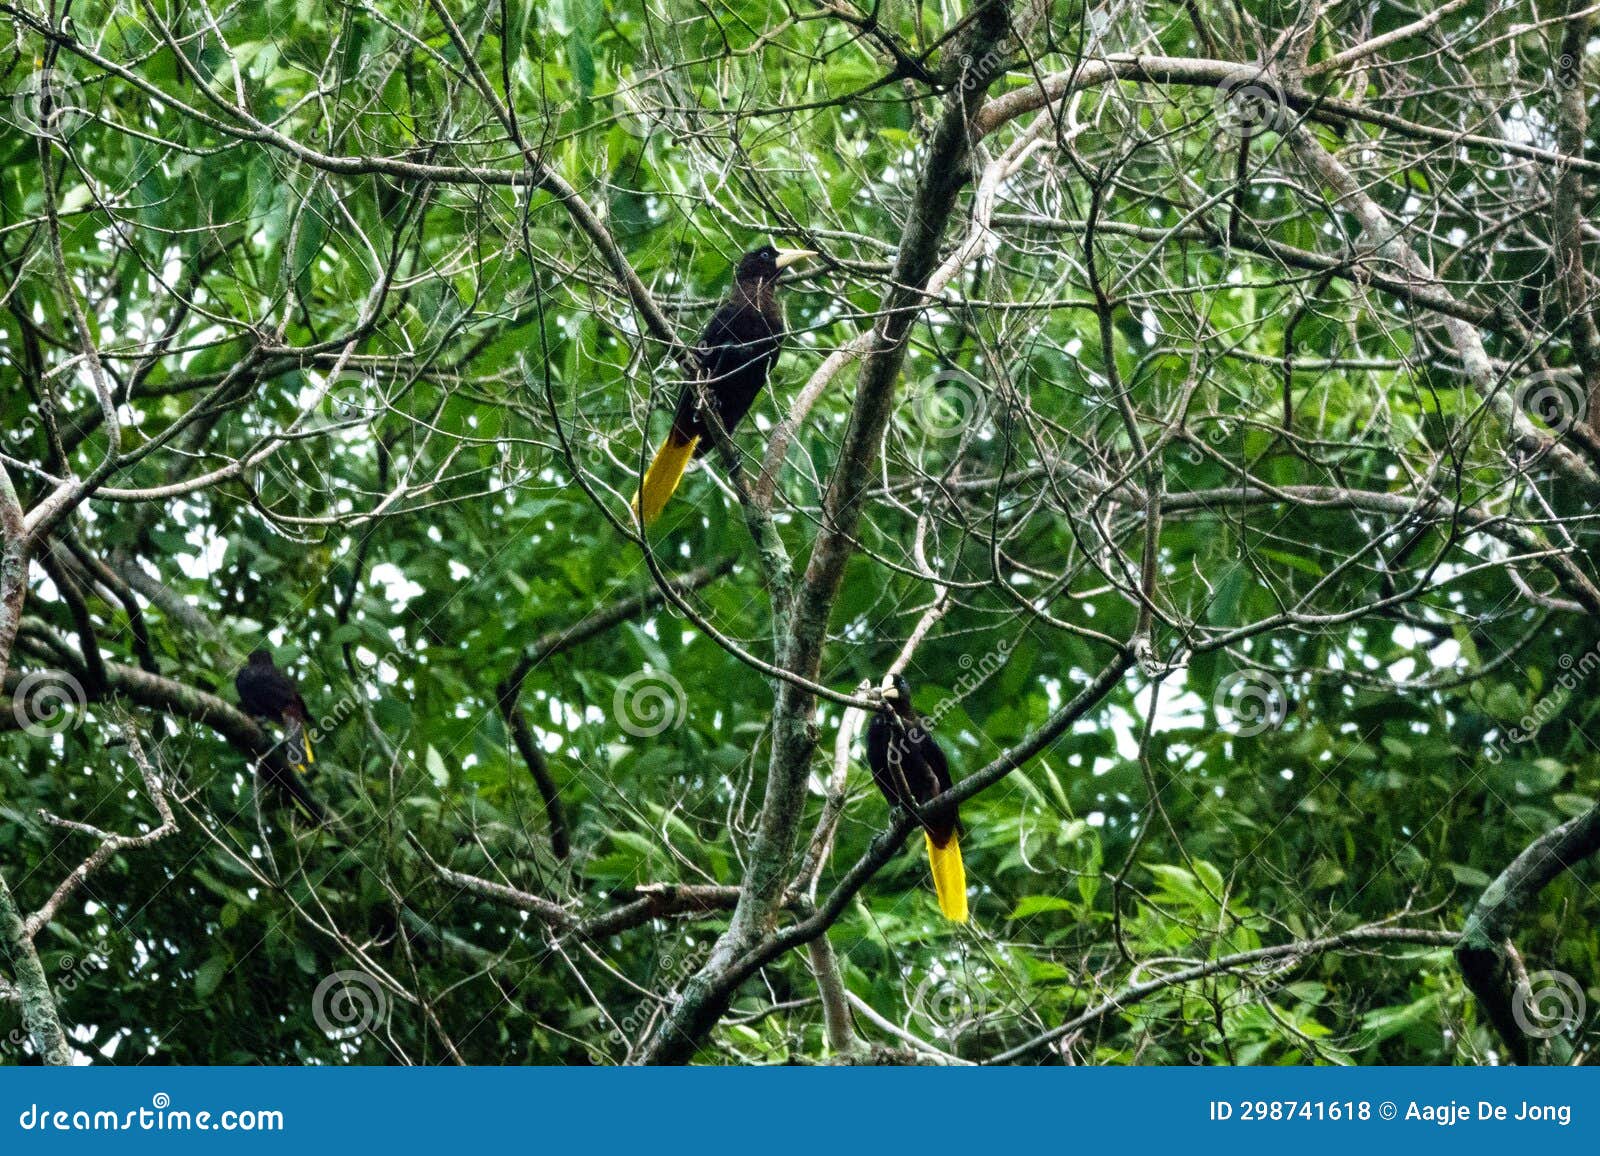 two crested oropendola at asa wright in trinidad and tobago